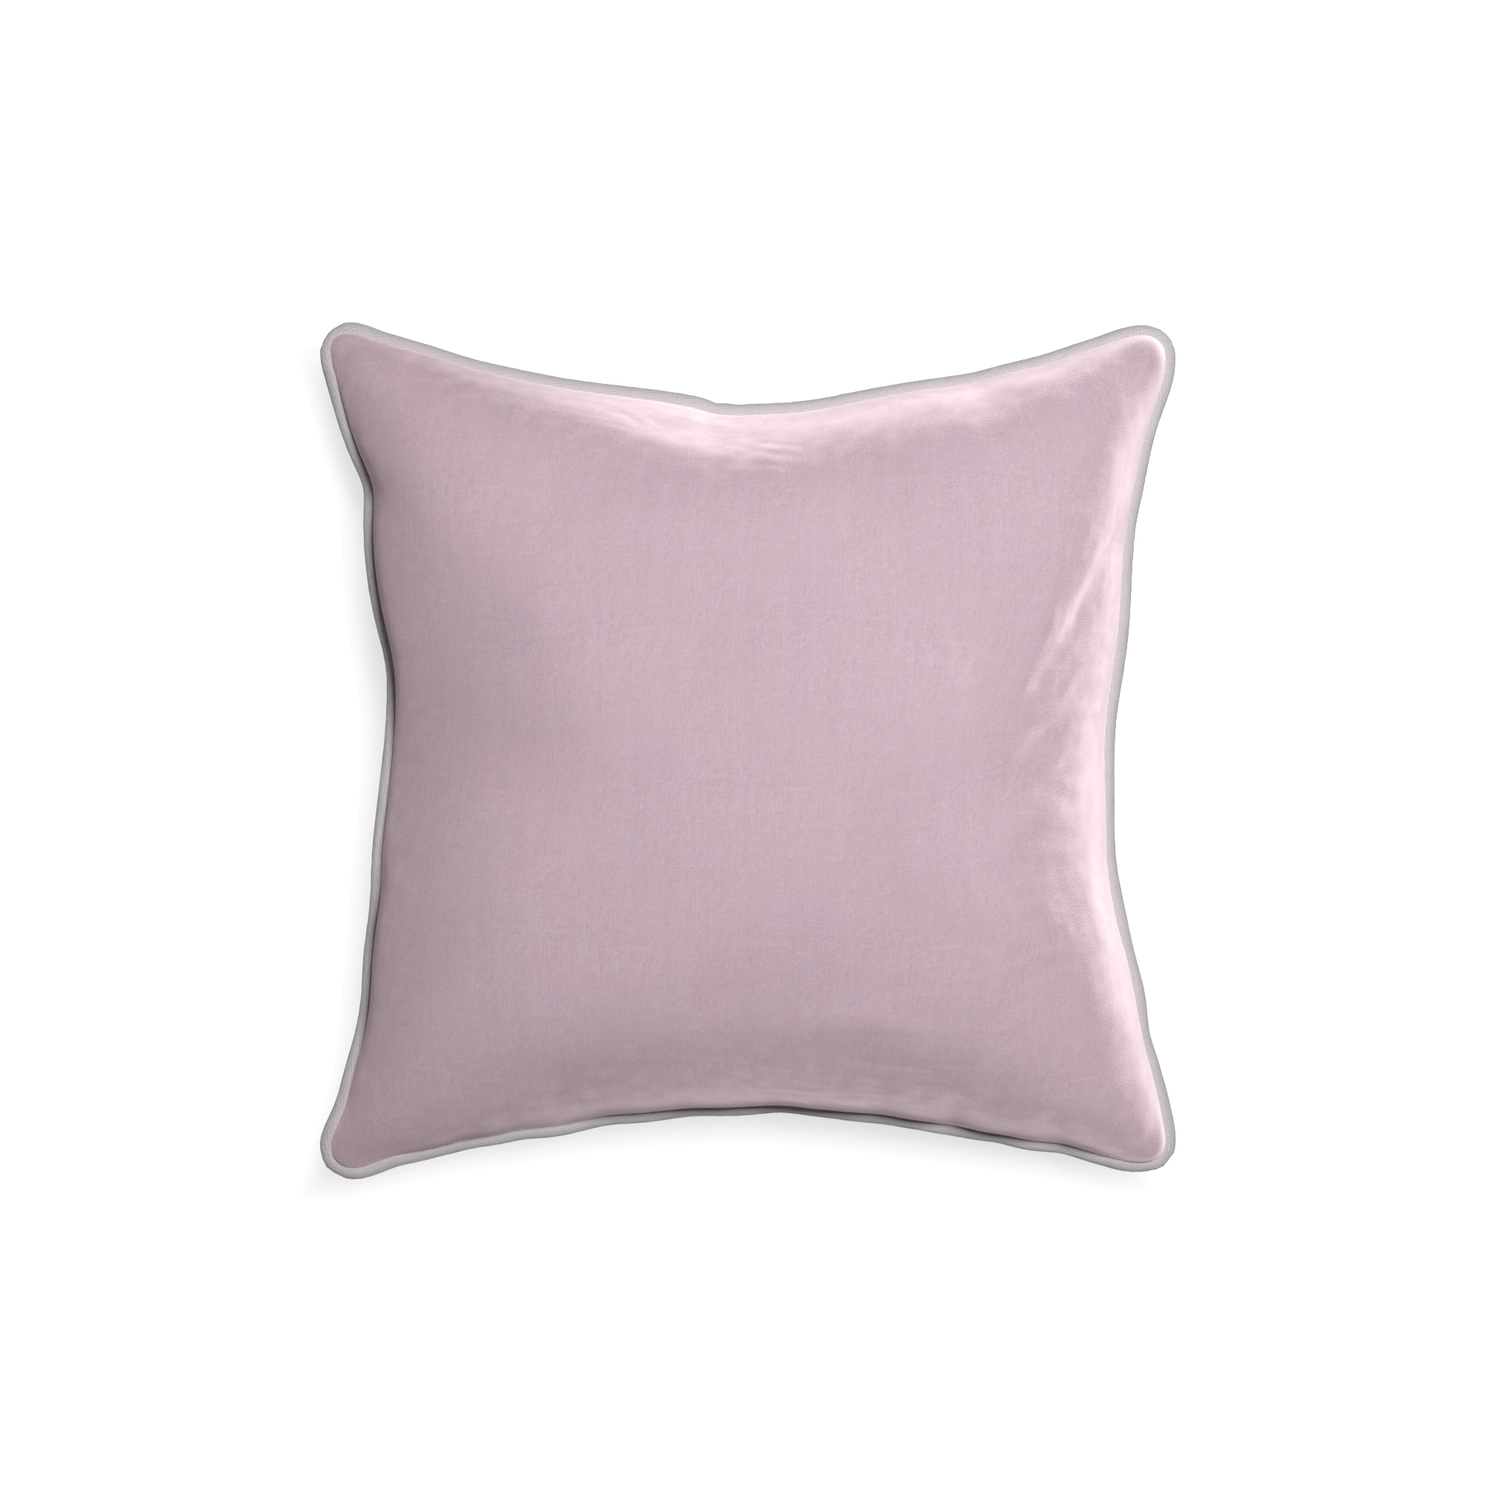 18-square lilac velvet custom pillow with pebble piping on white background